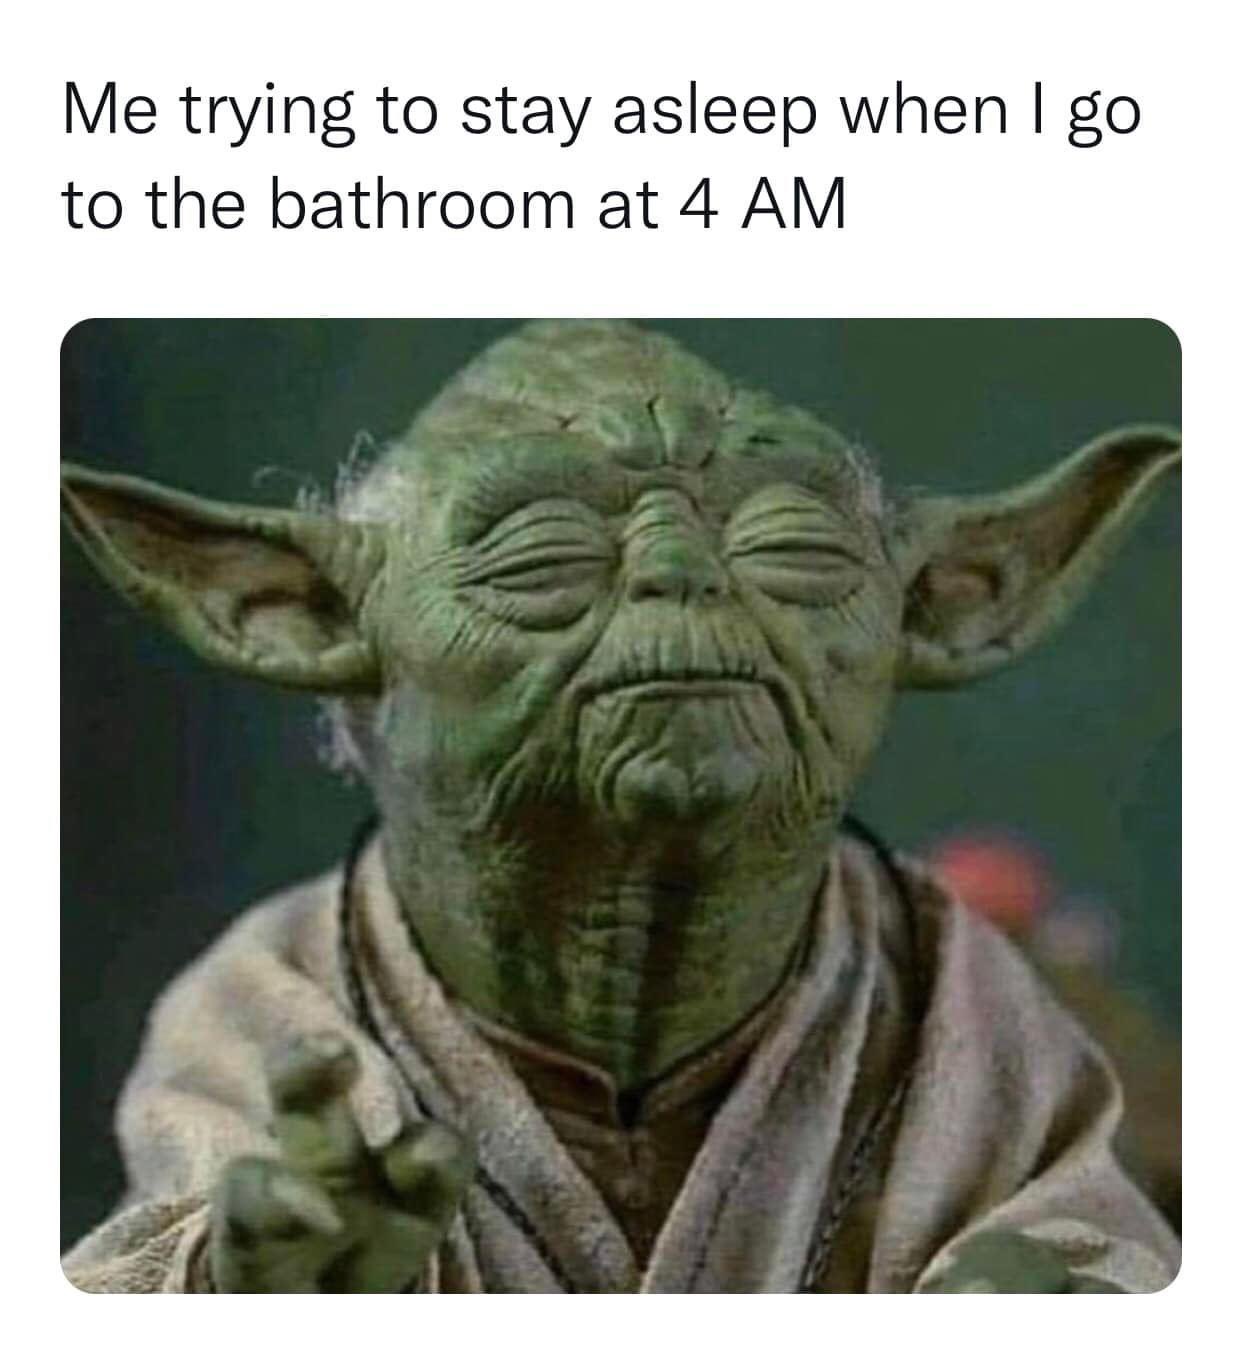 funny memes - me trying to stay sleepy when i go to the bathroom at 4am - Me trying to stay asleep when I go to the bathroom at 4 Am